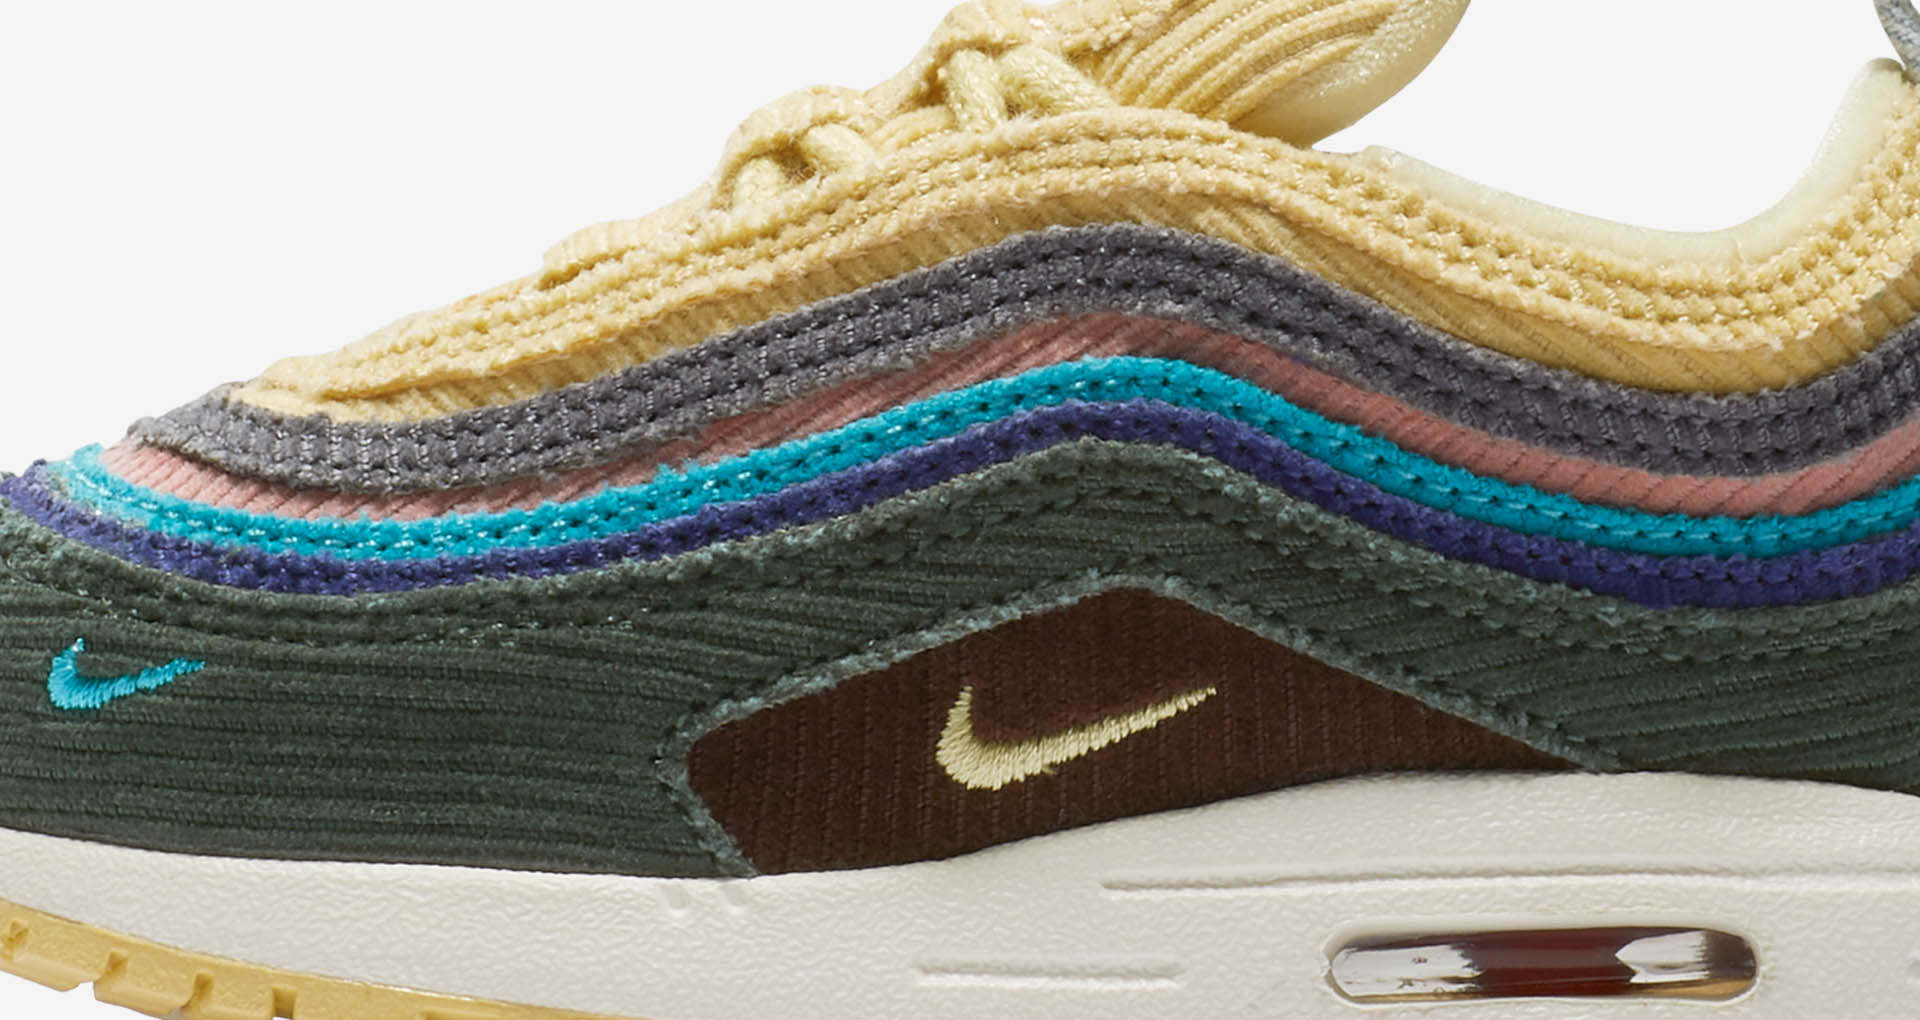 08-nike-toddler-air-max-197-vf-sw-sean-wotherspoon-bq1670-400